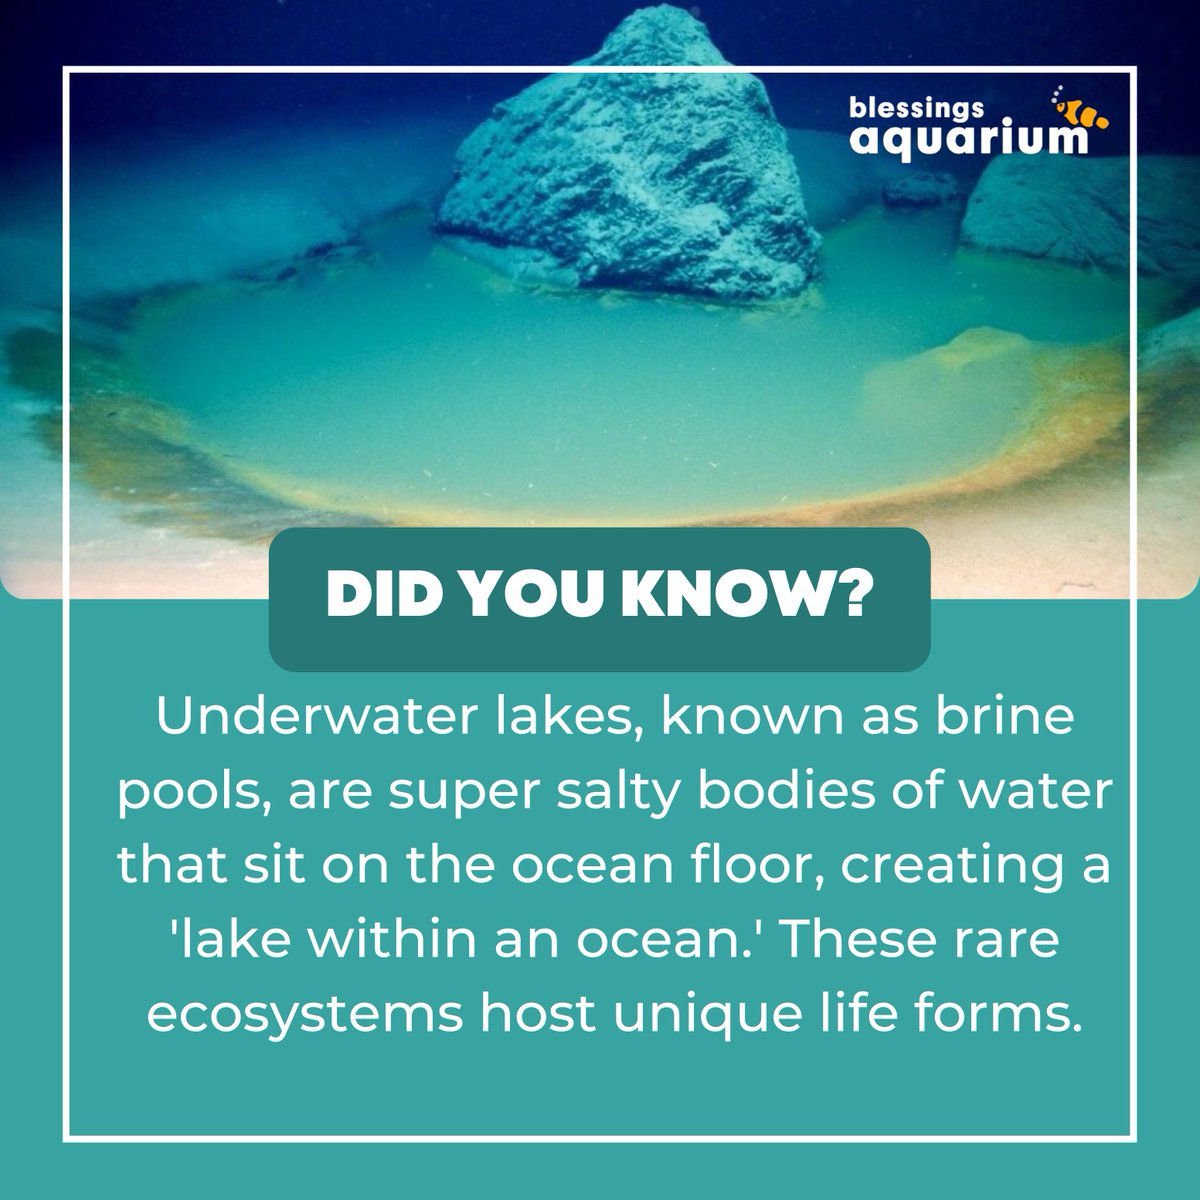 Did You Know?  Underwater lakes, known as brine pools, are super salty bodies of water that sit on the ocean floor, creating a 'lake within an ocean.' These rare ecosystems host unique life forms. #BrinePools #MarineEcosystems #Mariners #marine #AQUARIUM #TrendingNow